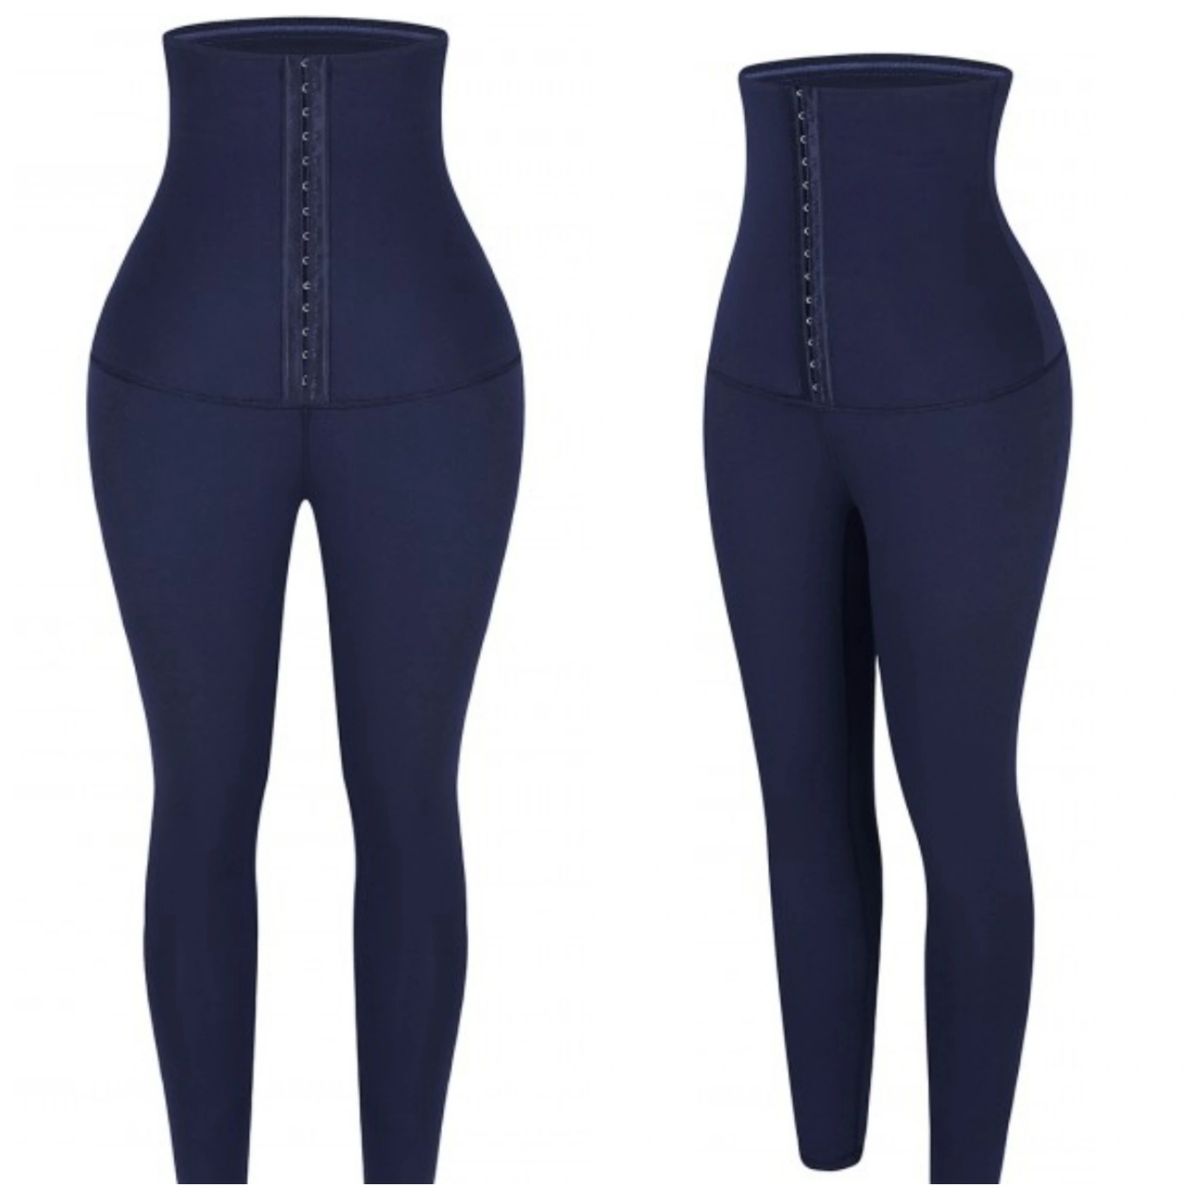 Juicy Waist Trainer Leggings by Summer Lucille